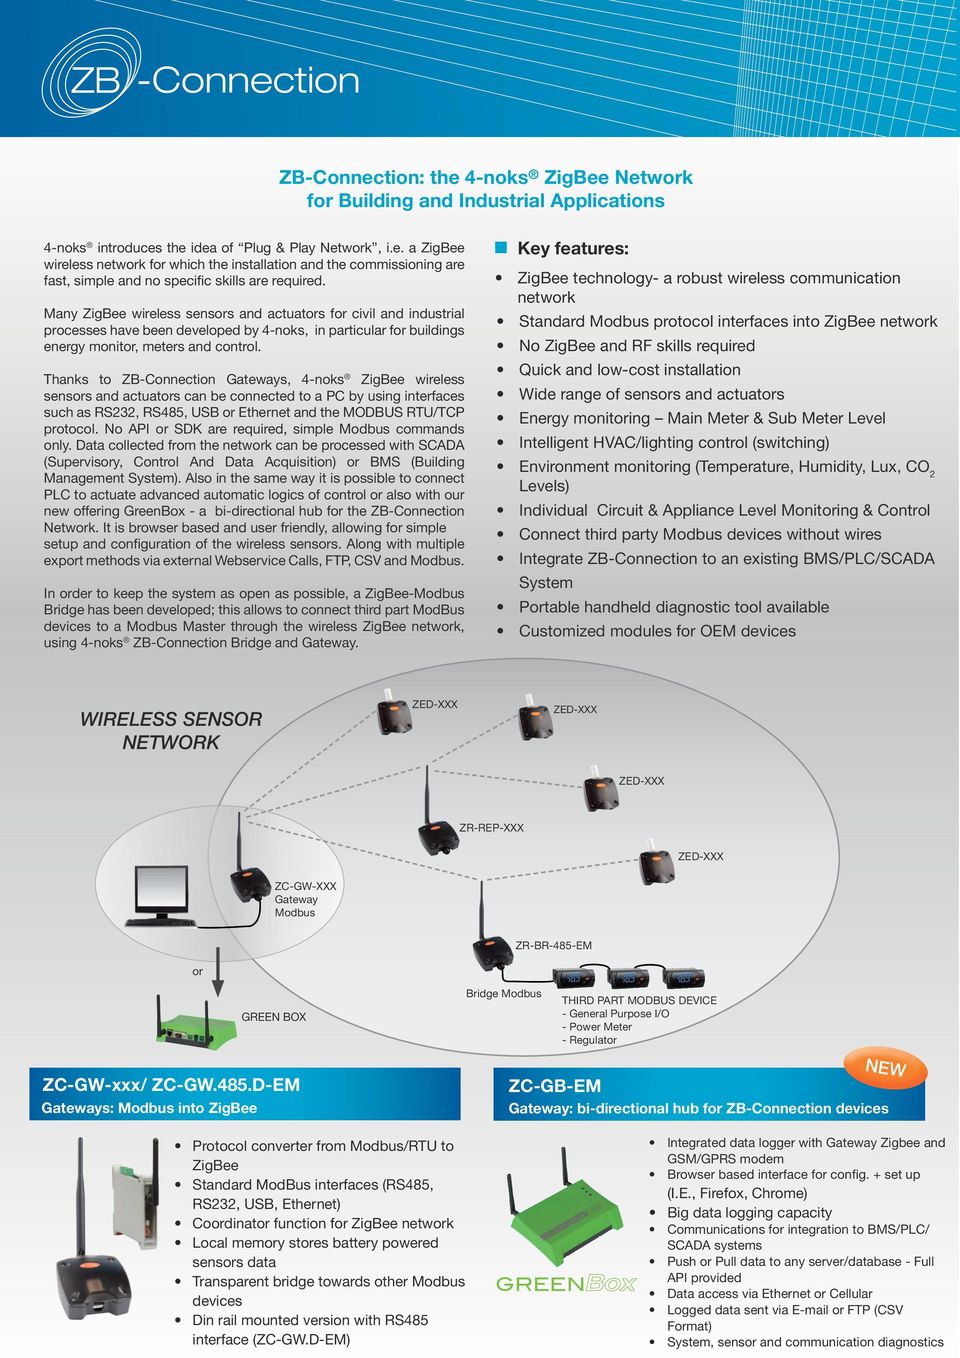 Thanks to ZB-Connection Gateways, 4-noks ZigBee wireless sensors and actuators can be connected to a PC by using interfaces such as RS232, RS485, USB or Ethernet and the MODBUS RTU/TCP protocol.